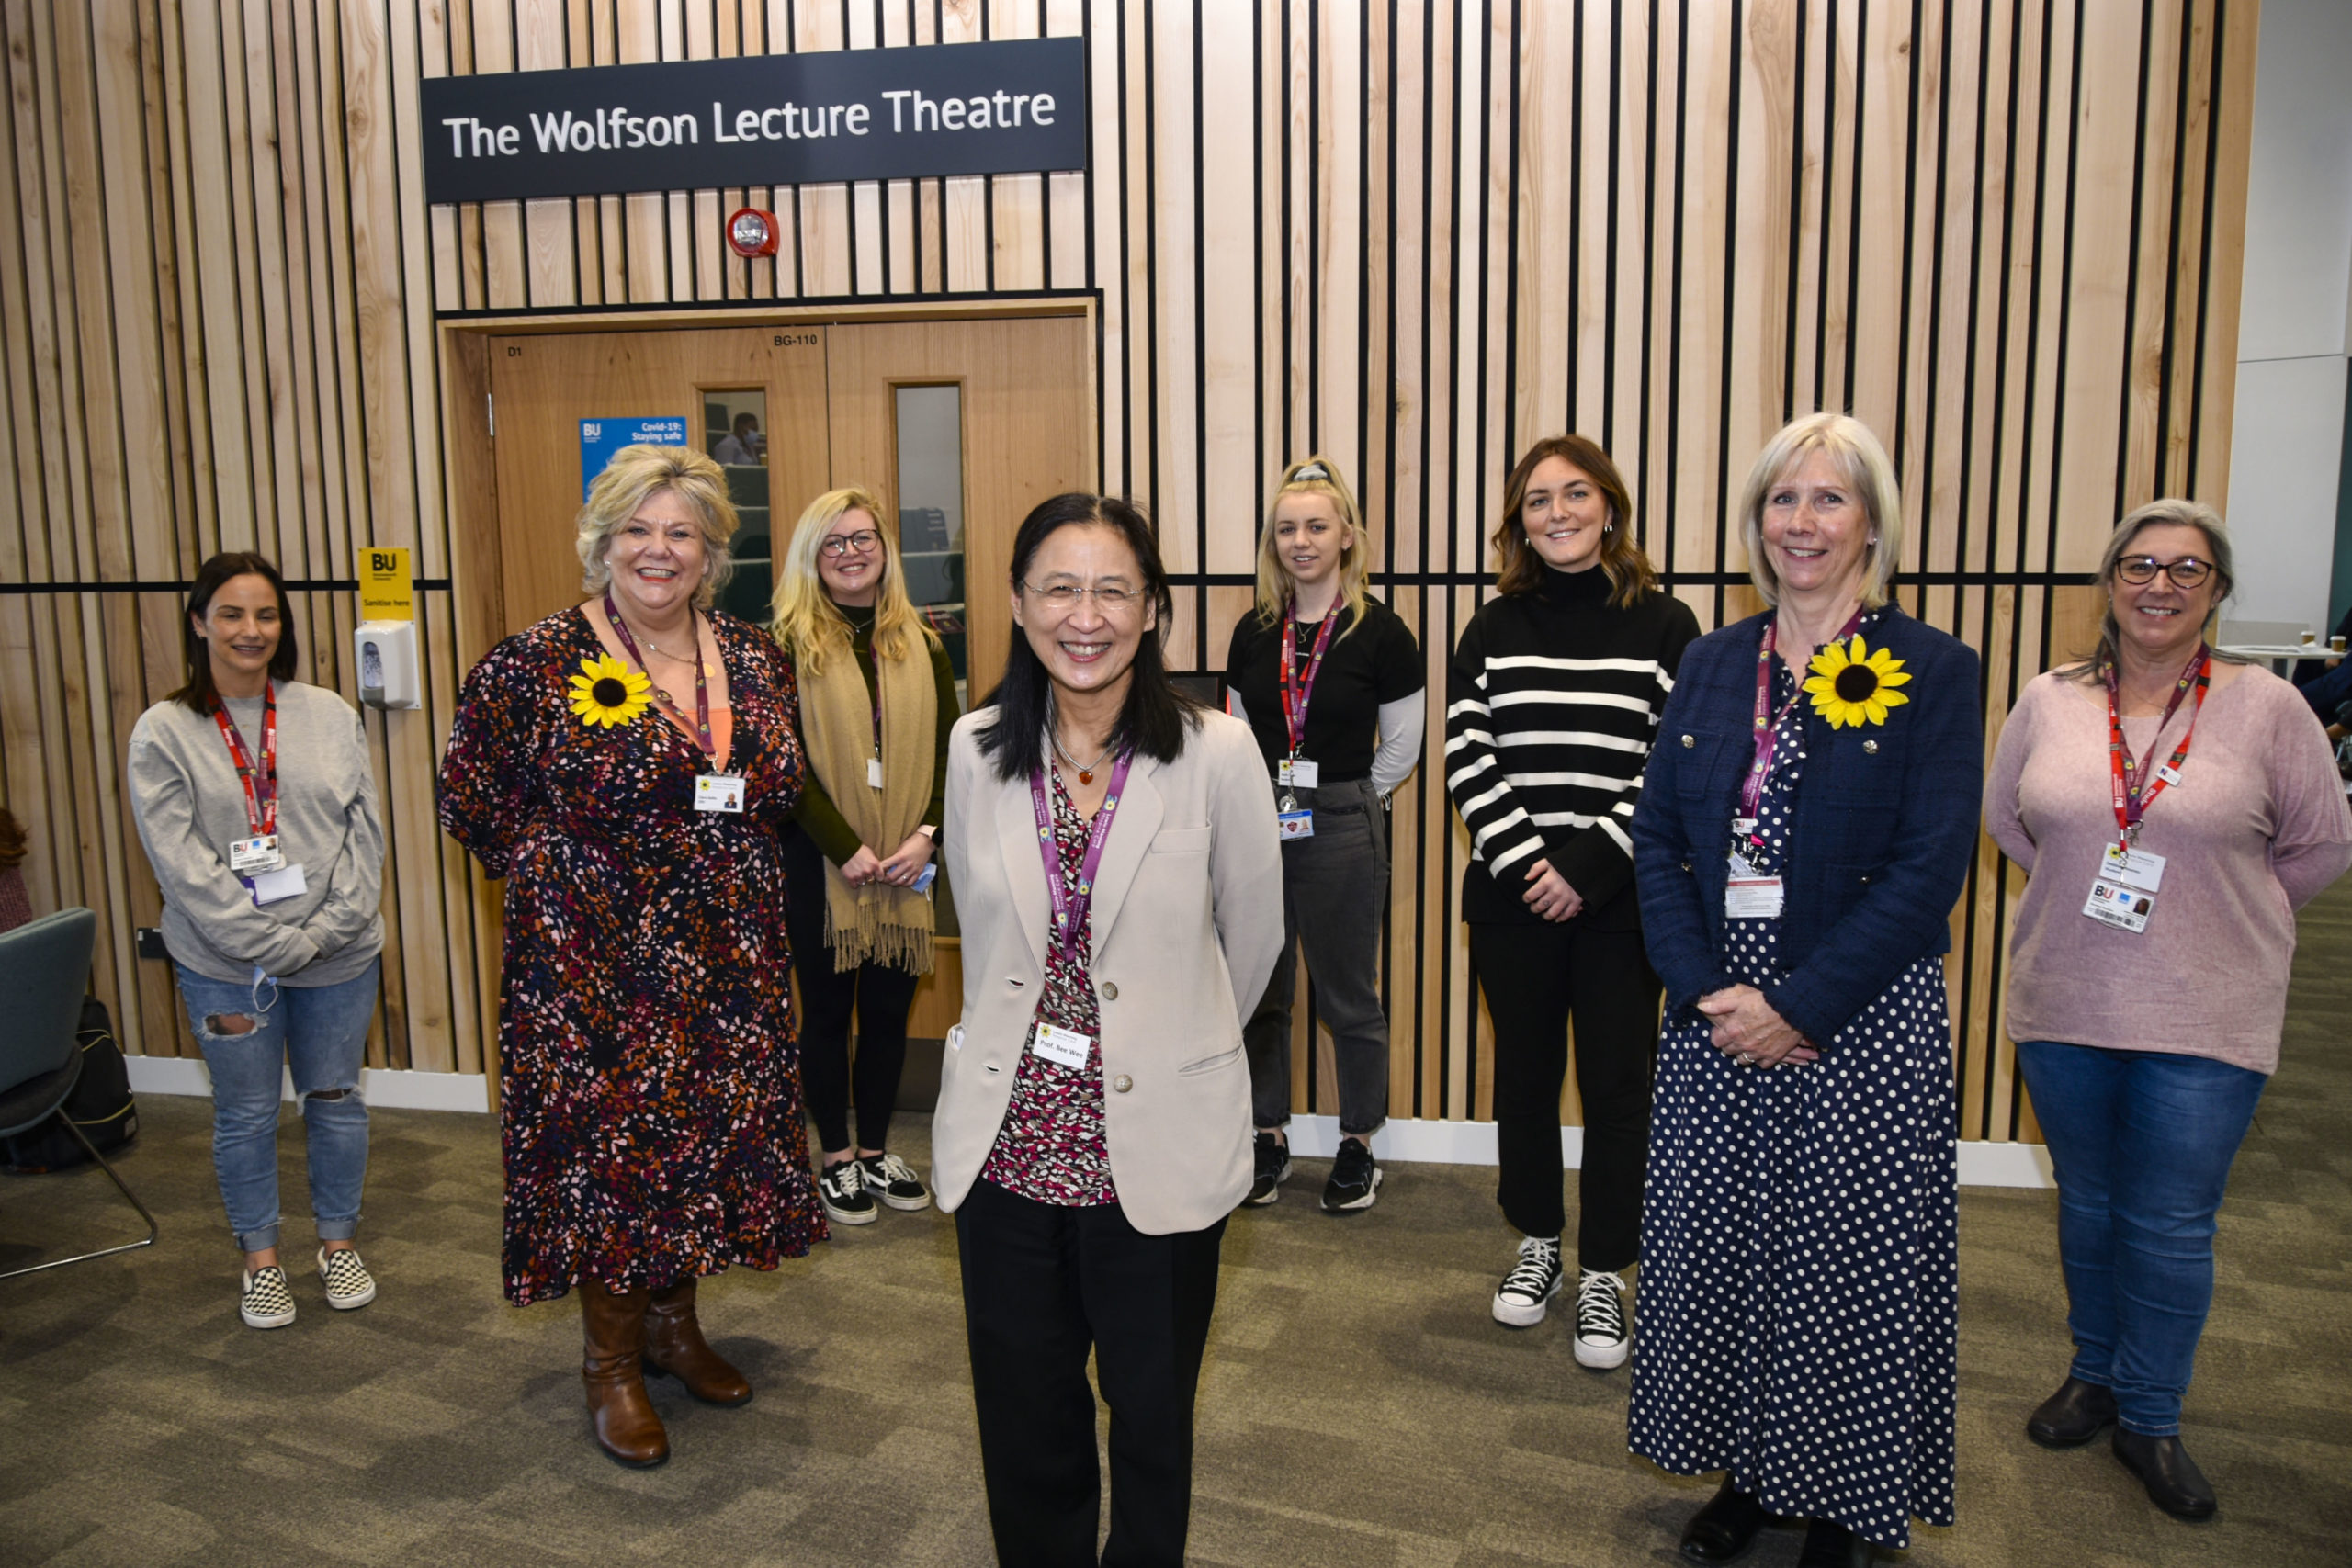 Lewis-Manning Hospice Care host inaugural educational lecture with Visiting Professor Bee Wee CBE